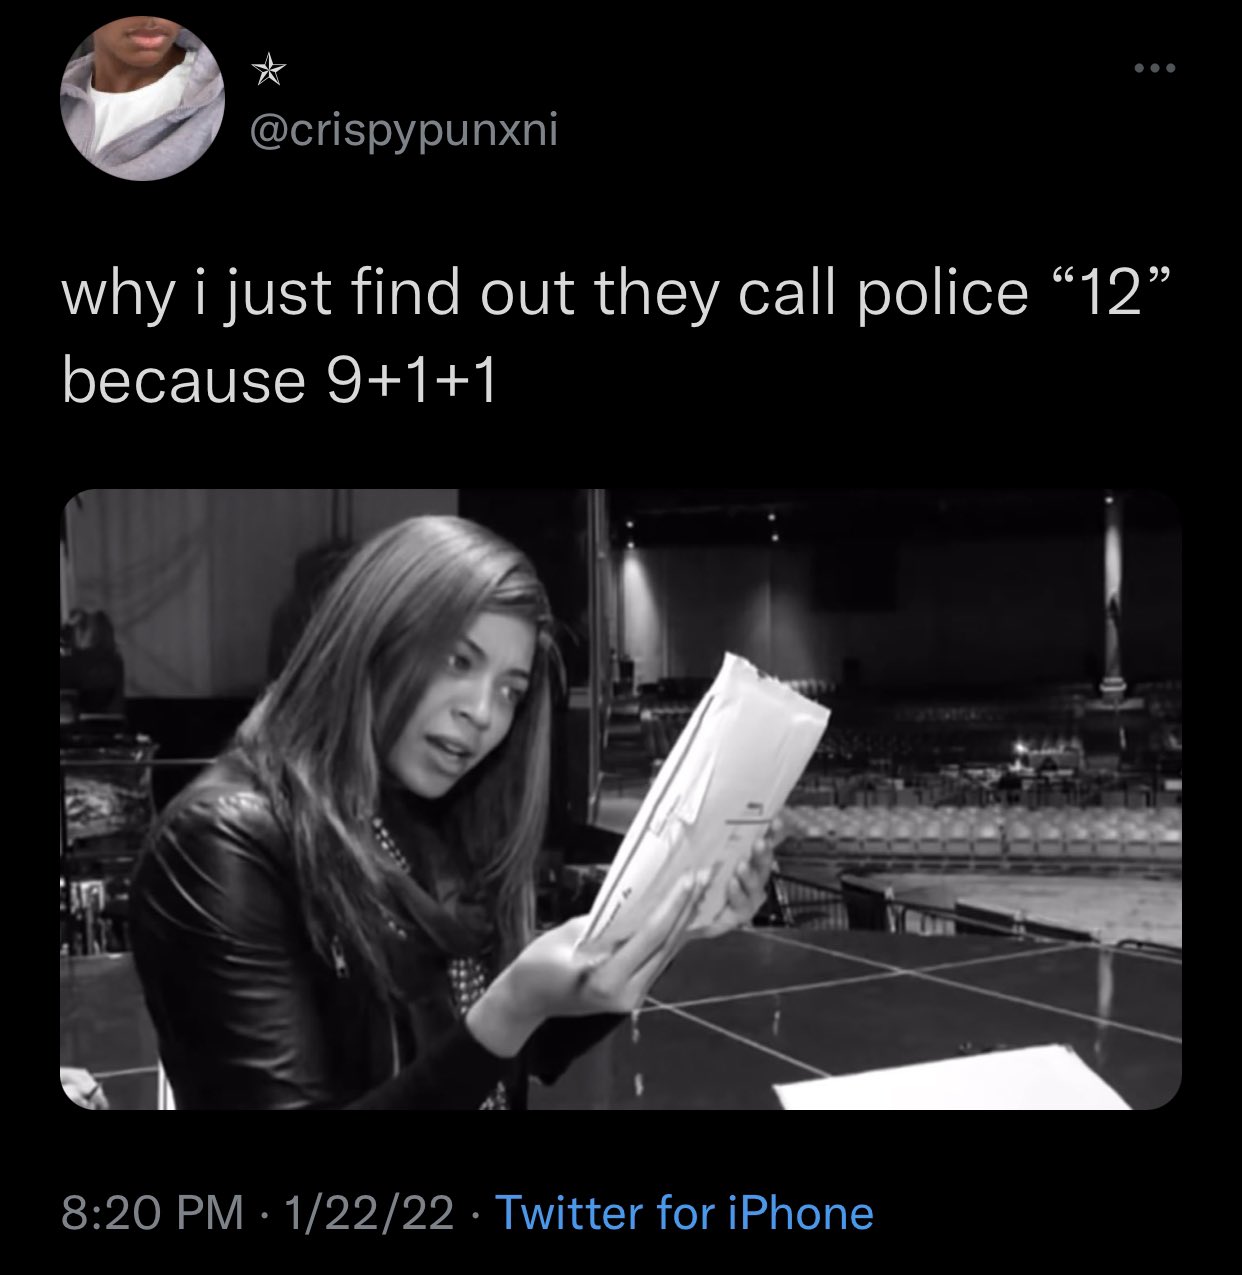 unhinged tweets - darkness - why i just find out they call police 12 because 911 12222 Twitter for iPhone